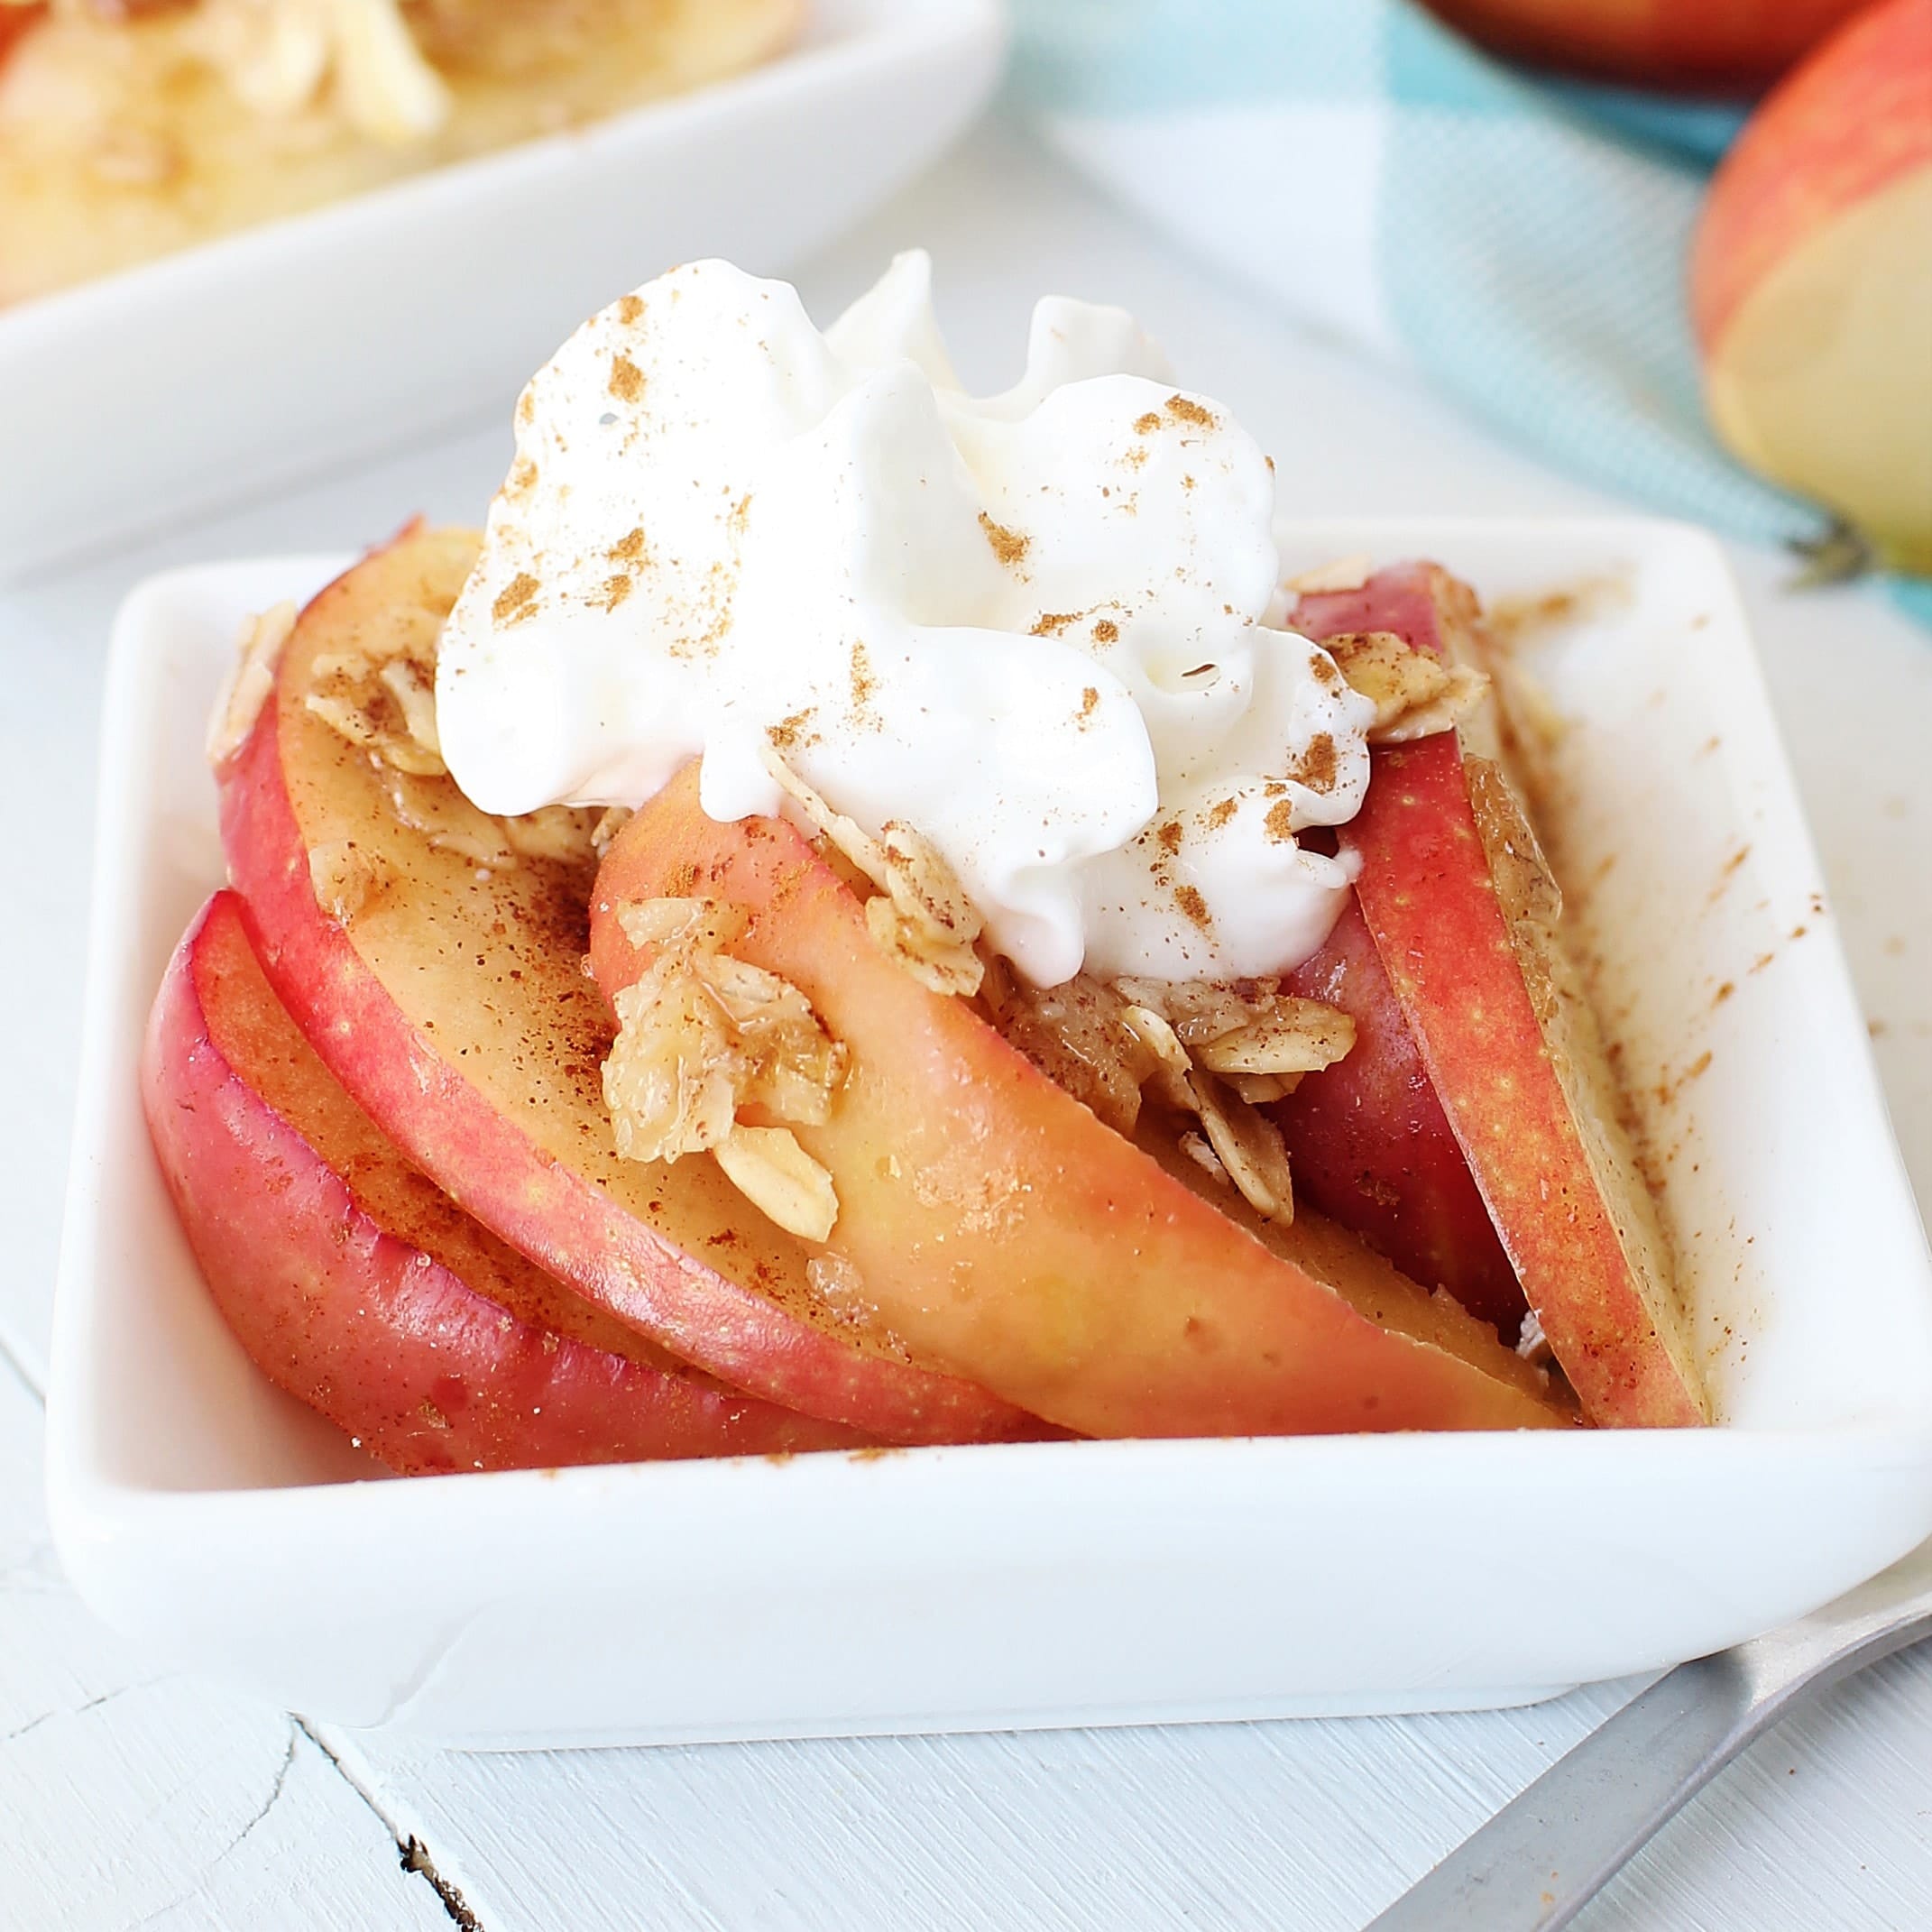 Delicious and Diabetic-Friendly: Apple Dessert Recipes for Balanced Indulgence